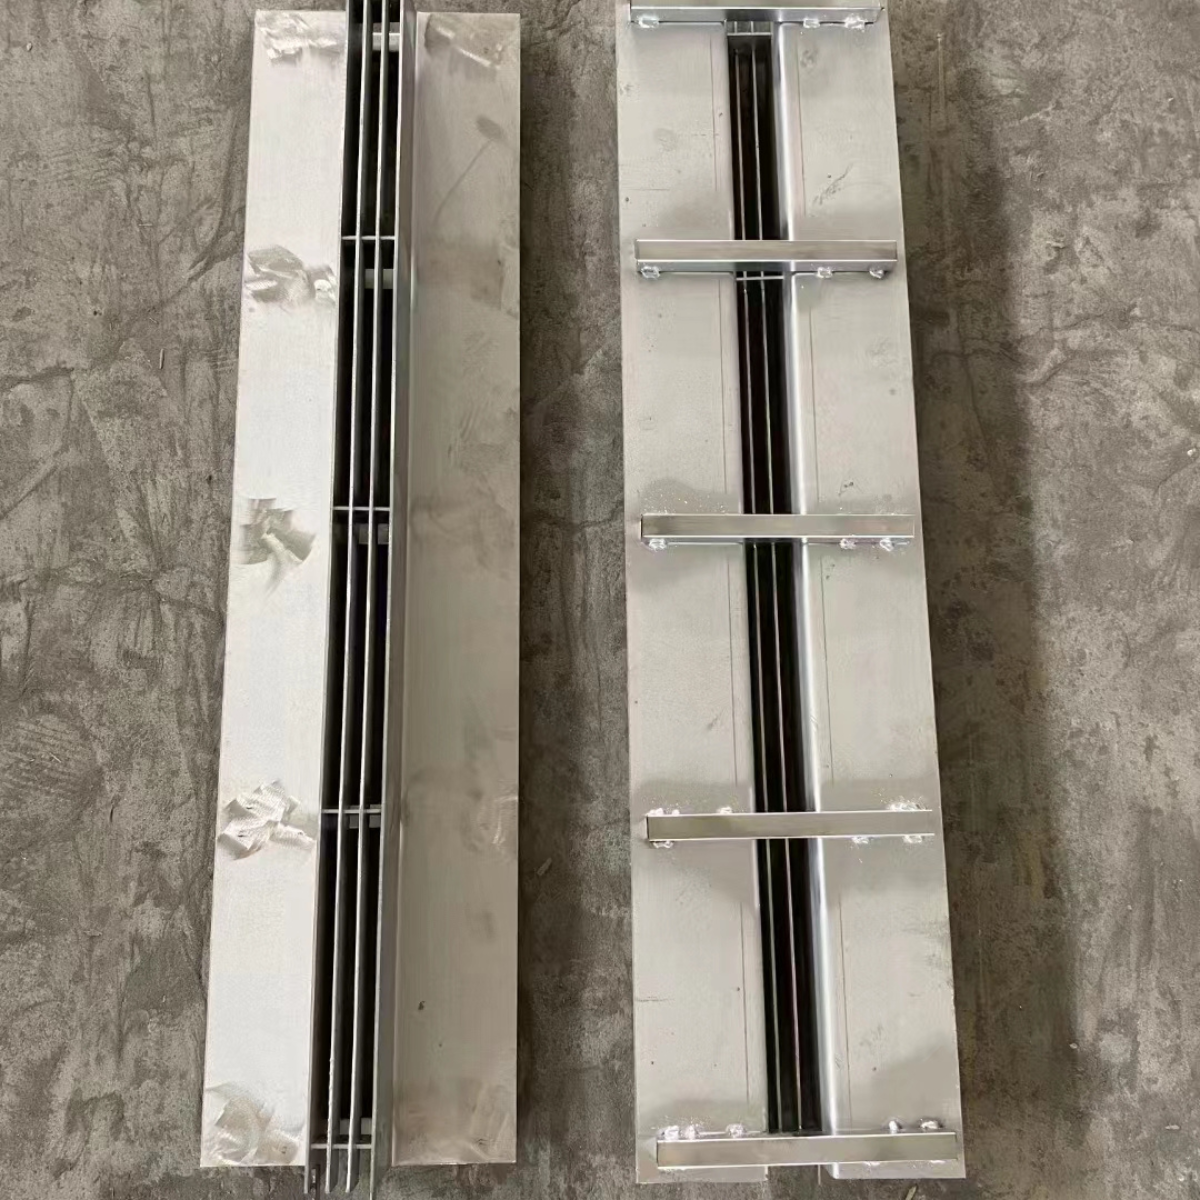 Stainless steel linear cover plate Stainless steel custom cover plate Drain cover Manhole cover Sewer repair manhole covers